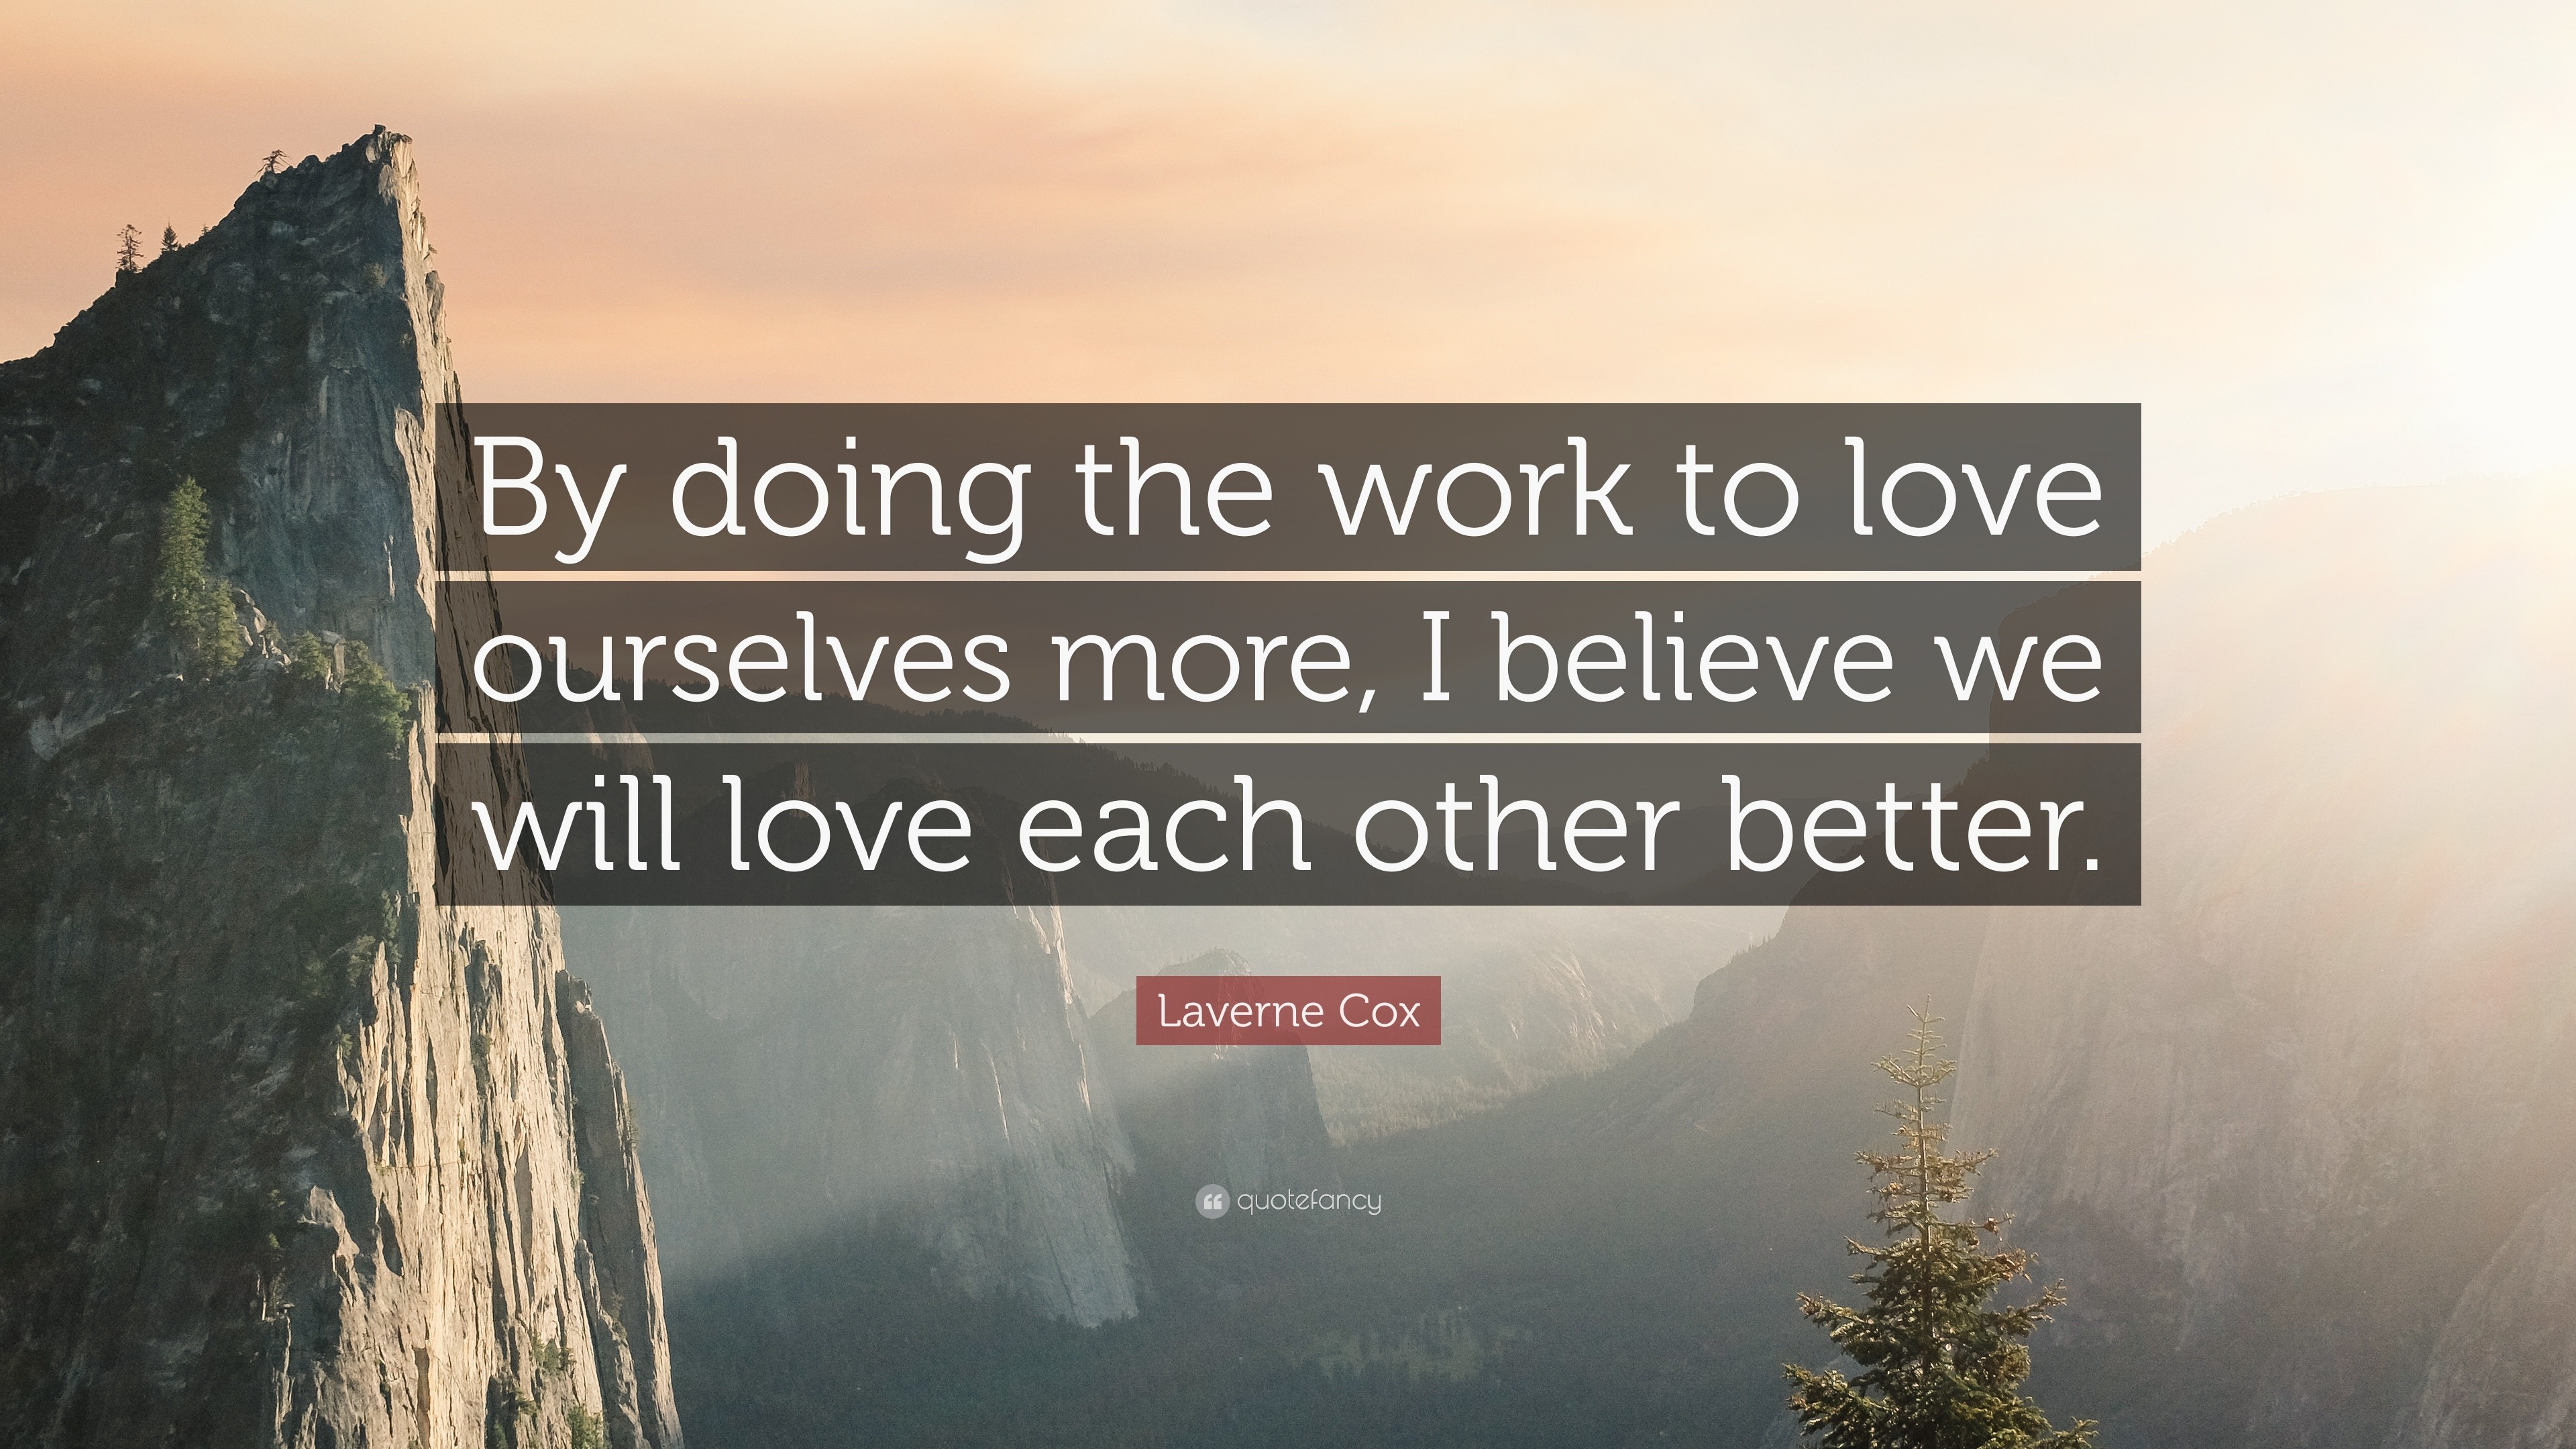 Laverne Cox Quote: "By doing the work to love ourselves more, I believe we will love each other ...